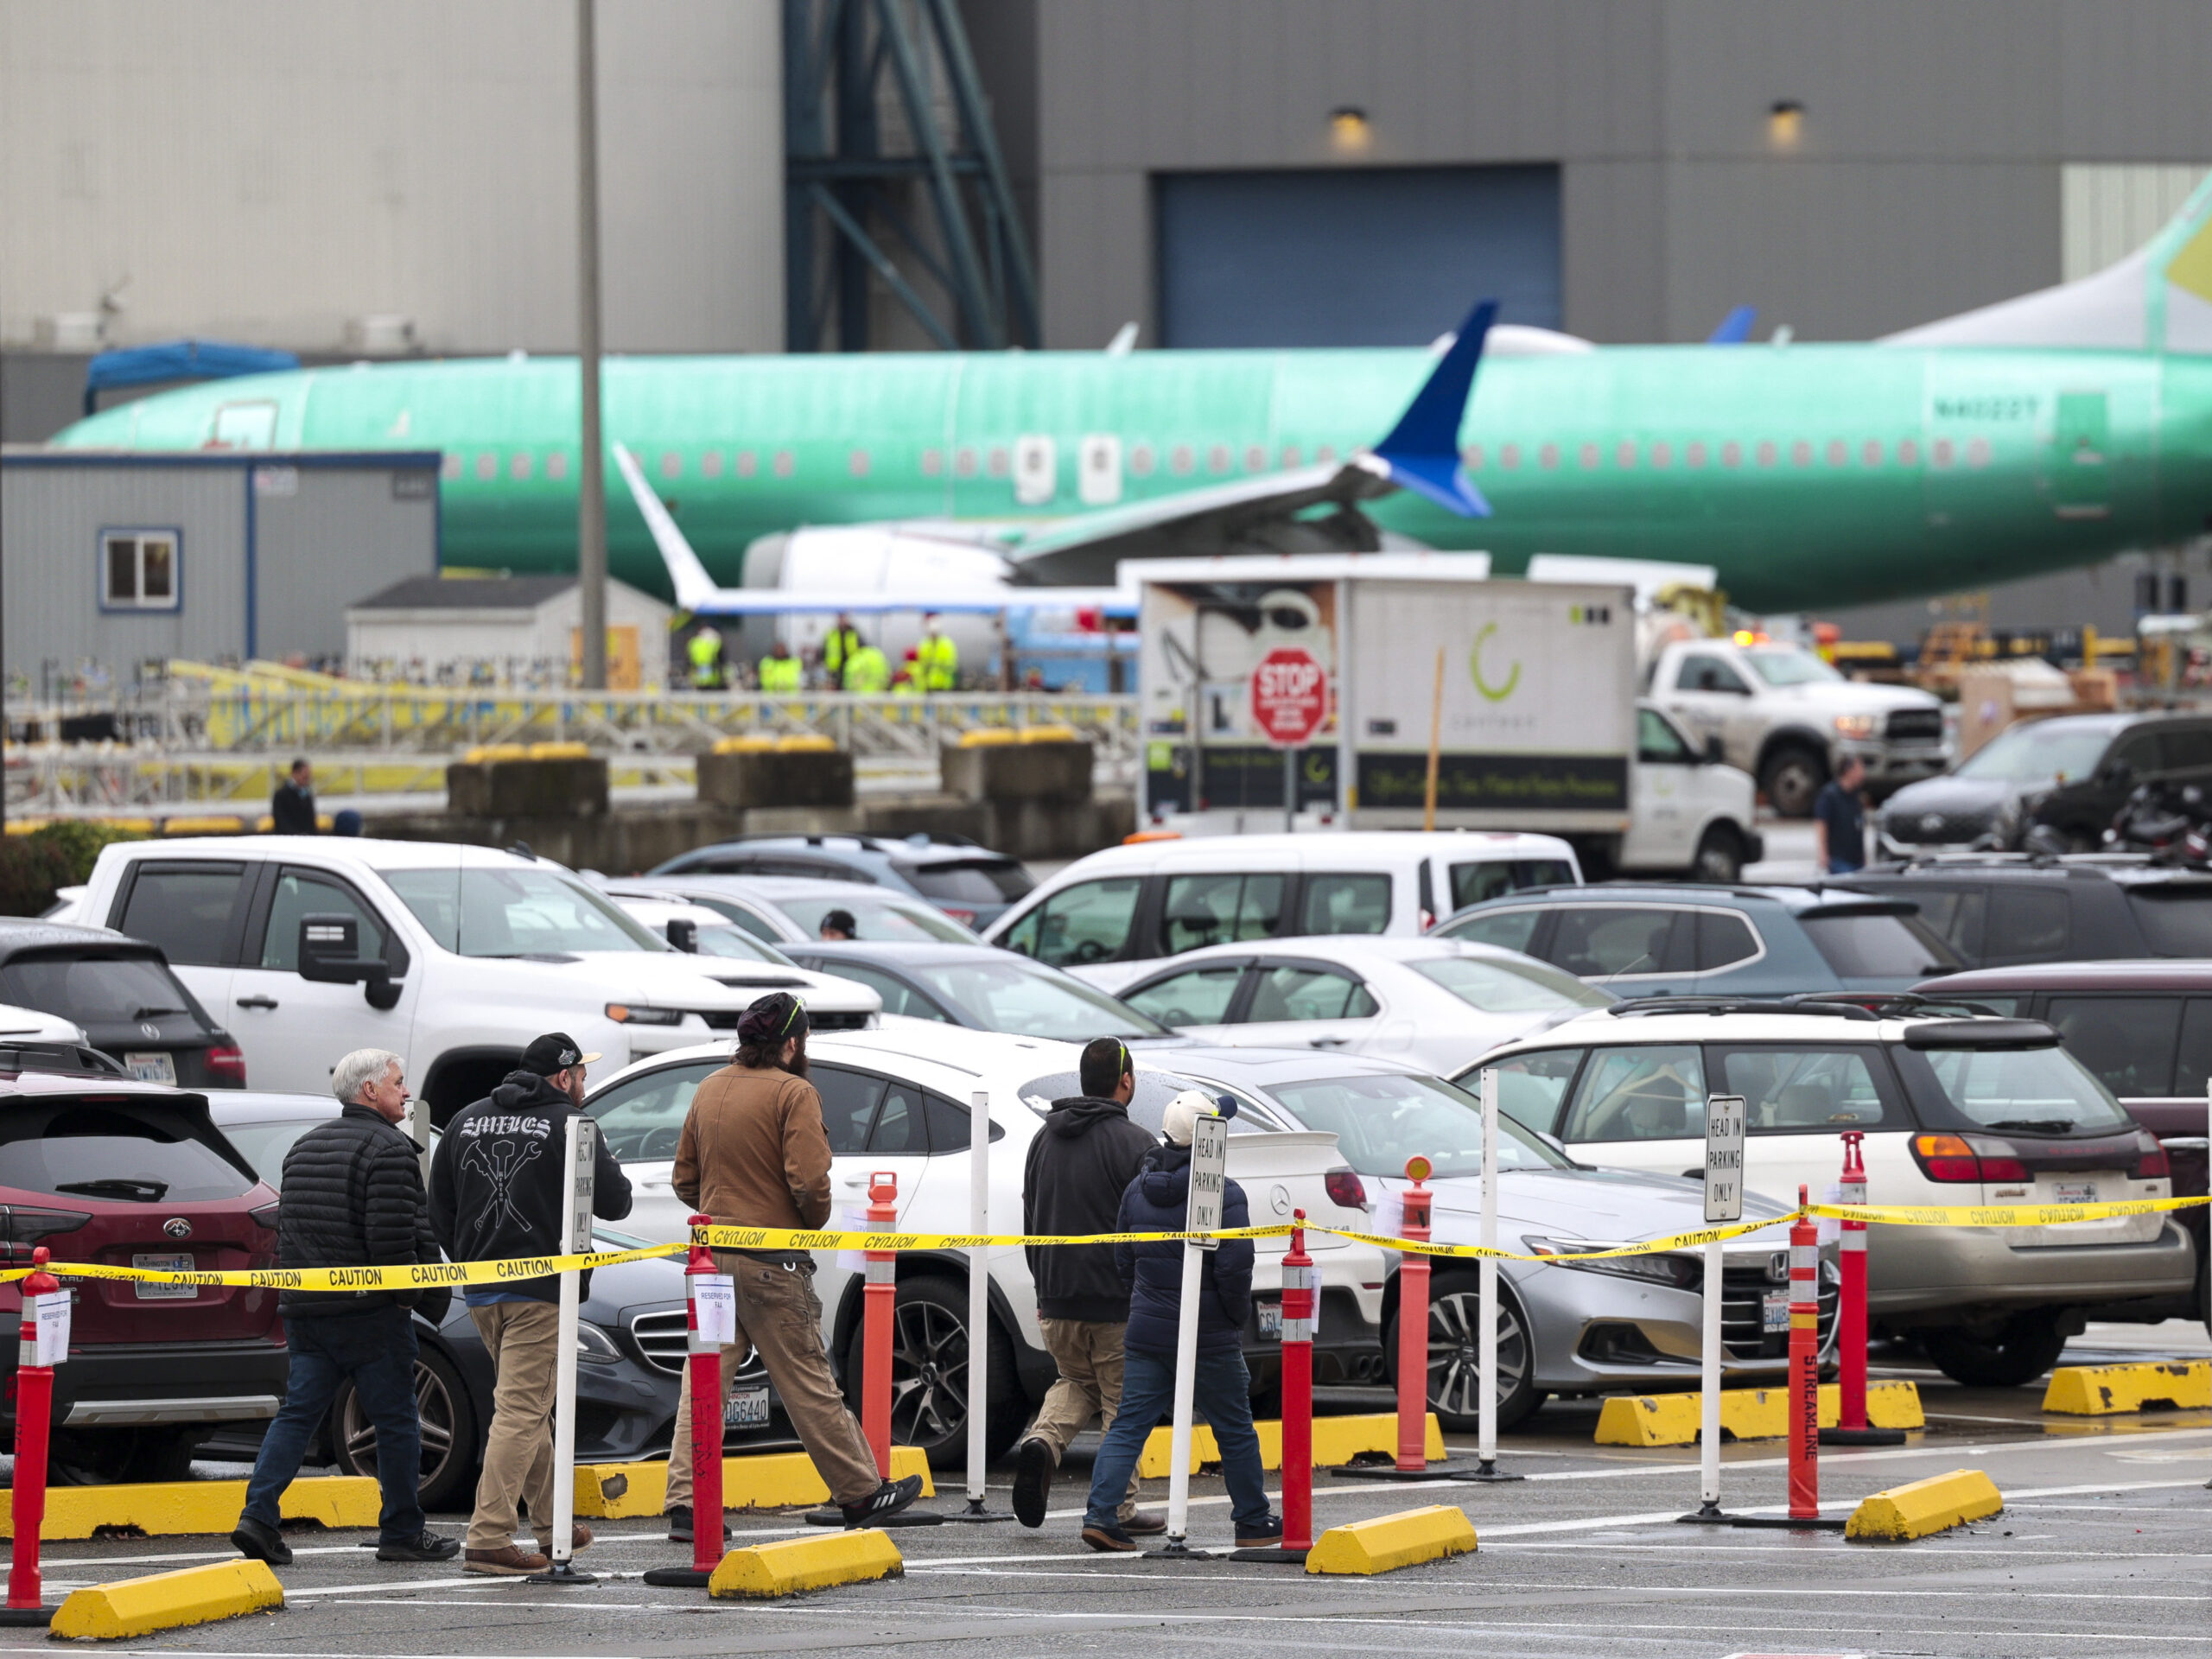 The FAA gives Boeing 90 days to fix quality control issues. Critics say they run deep